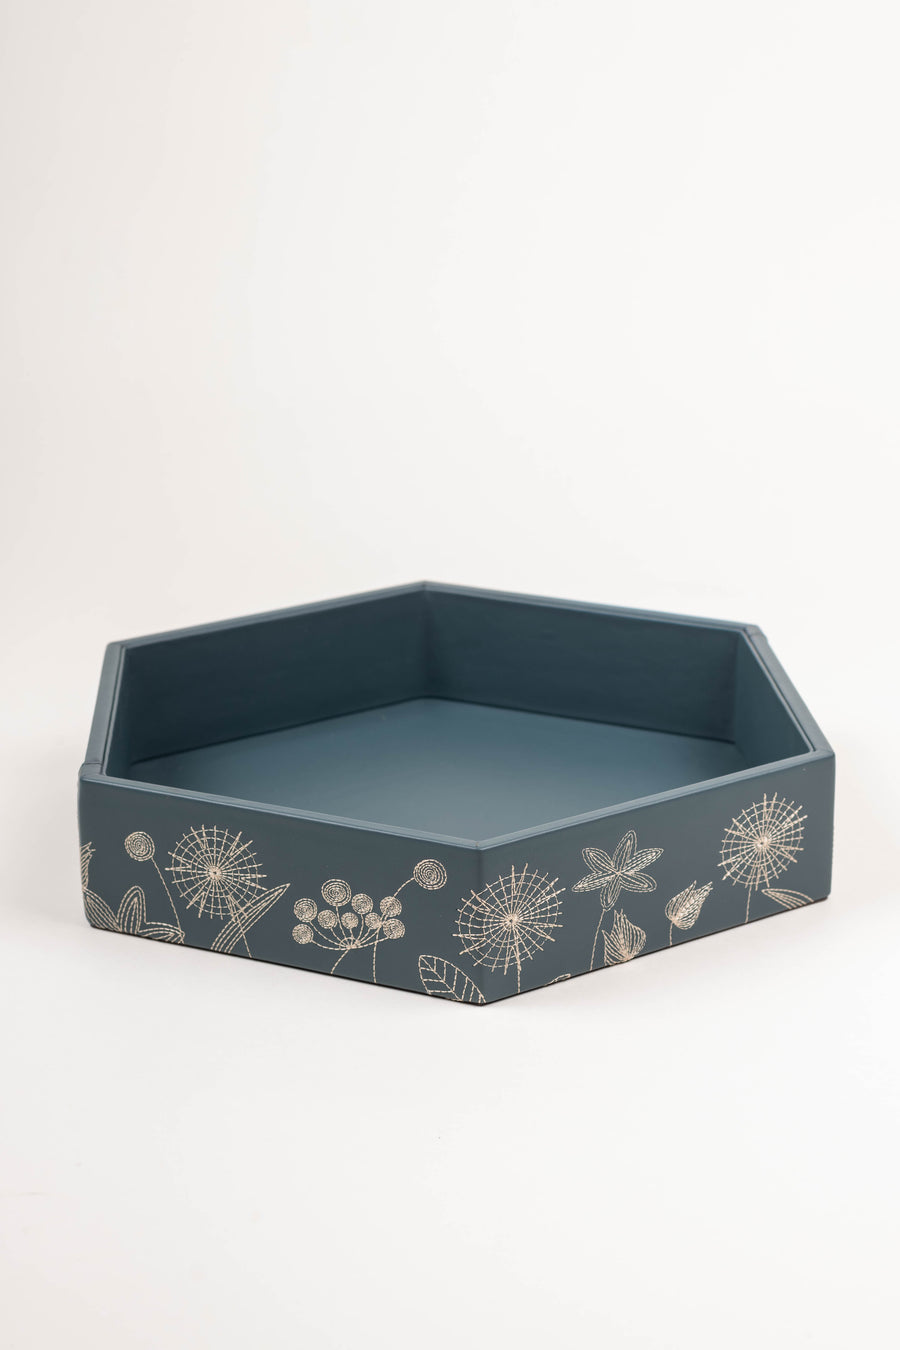 Bloom Hex Tray